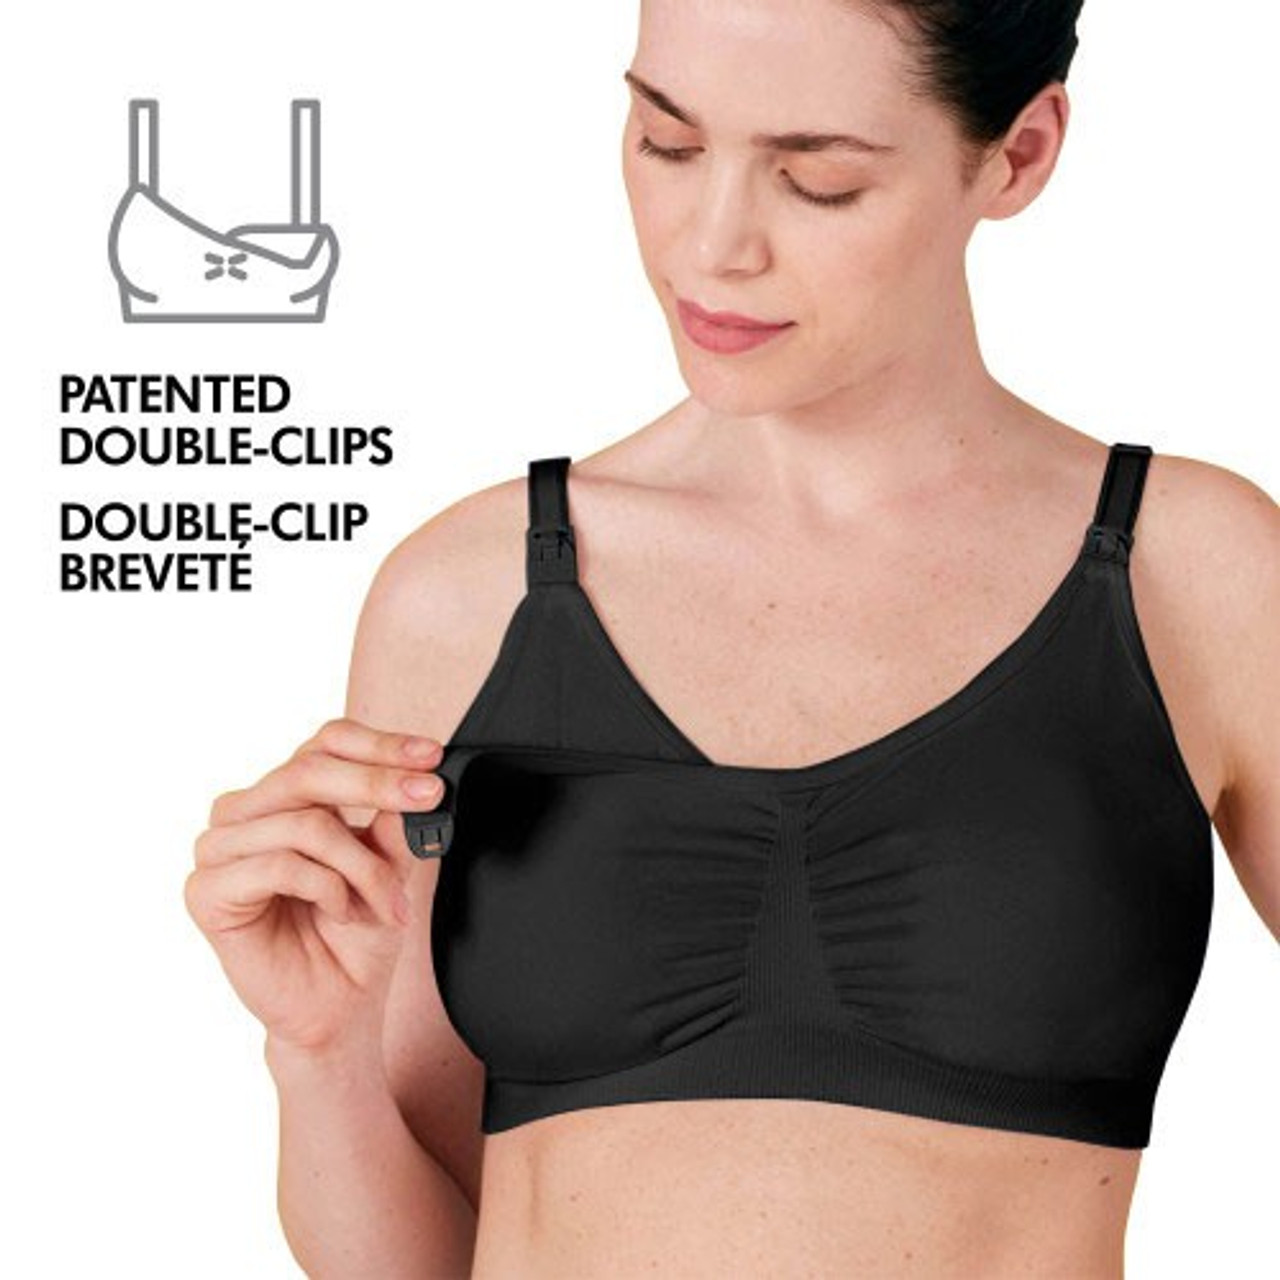 Auden Women's All-in-One Nursing and Pumping Bra -, Black, X-Large